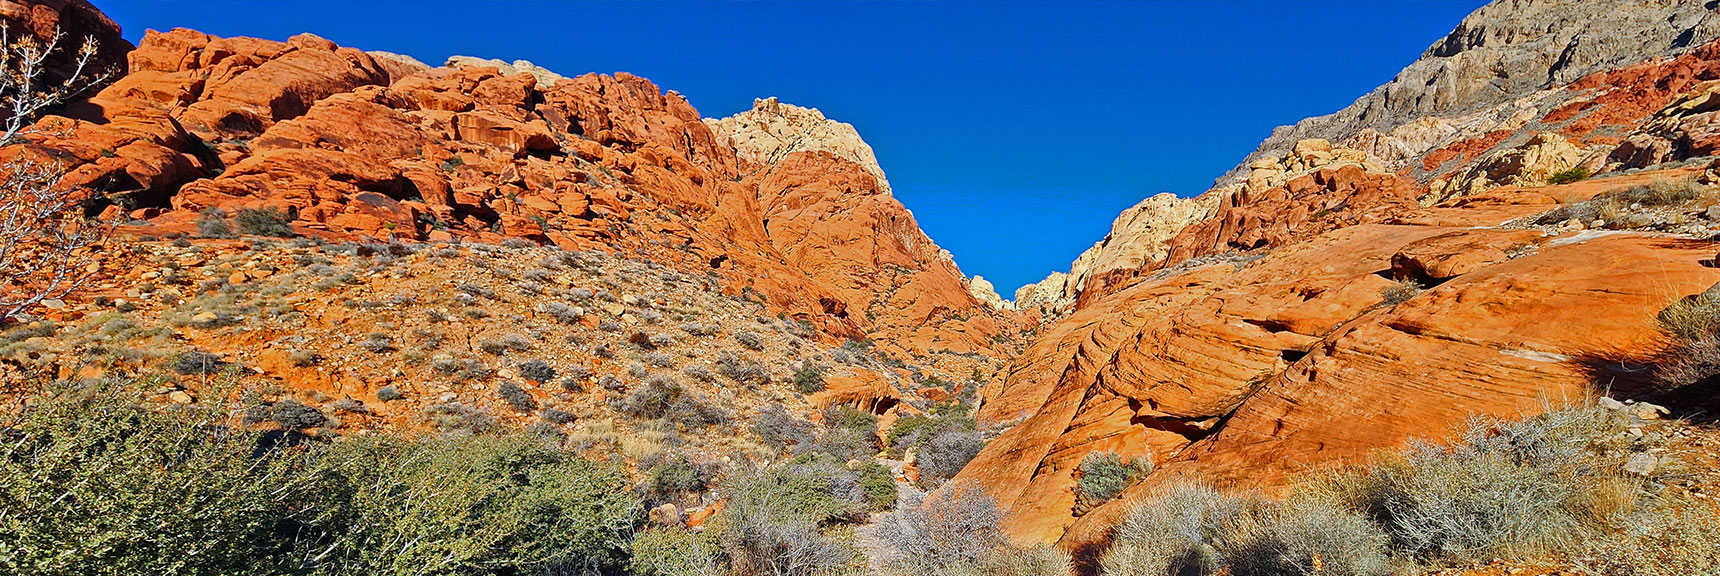 Enter Ash Canyon at the Upper End of Ash Spring | Upper Calico Hills Loop | Calico Basin and Red Rock Canyon, Nevada